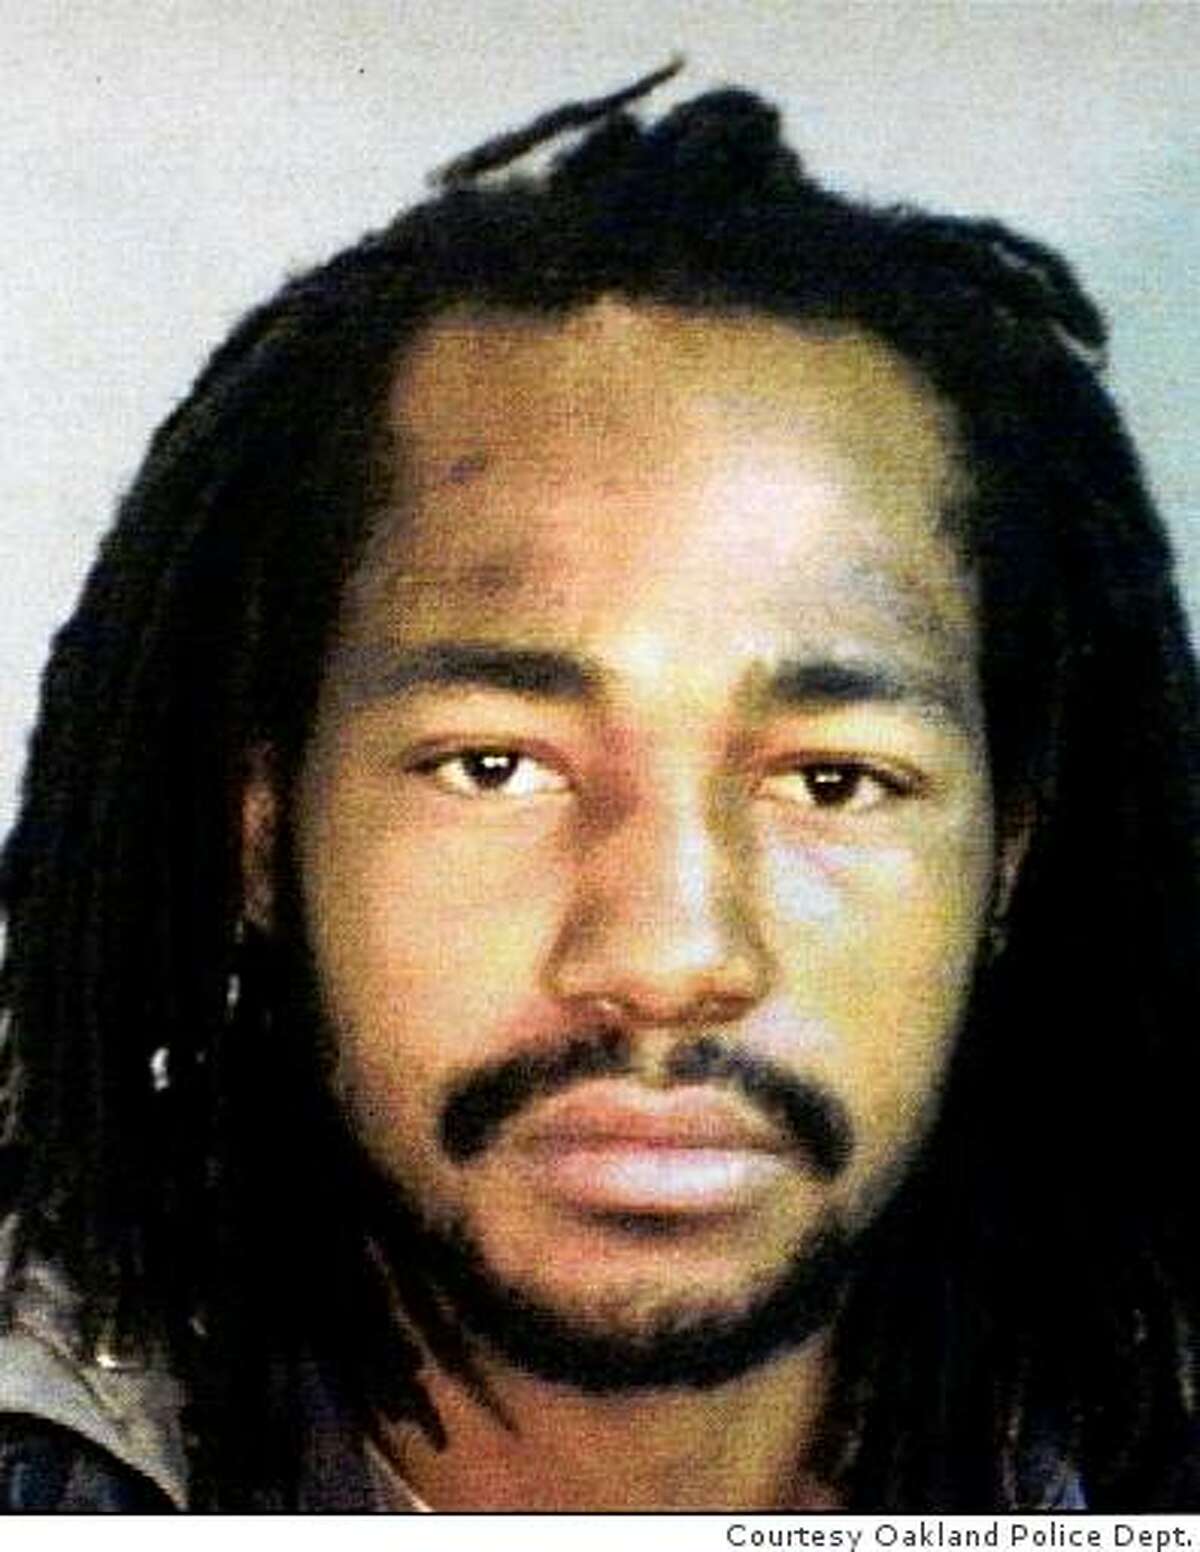 Oakland police released this 2002 booking photograph of Odell Roberson in Oakland, Calif. on Saturday, Oct. 13, 2007. Roberson was killed on 60th Street in July 2007.